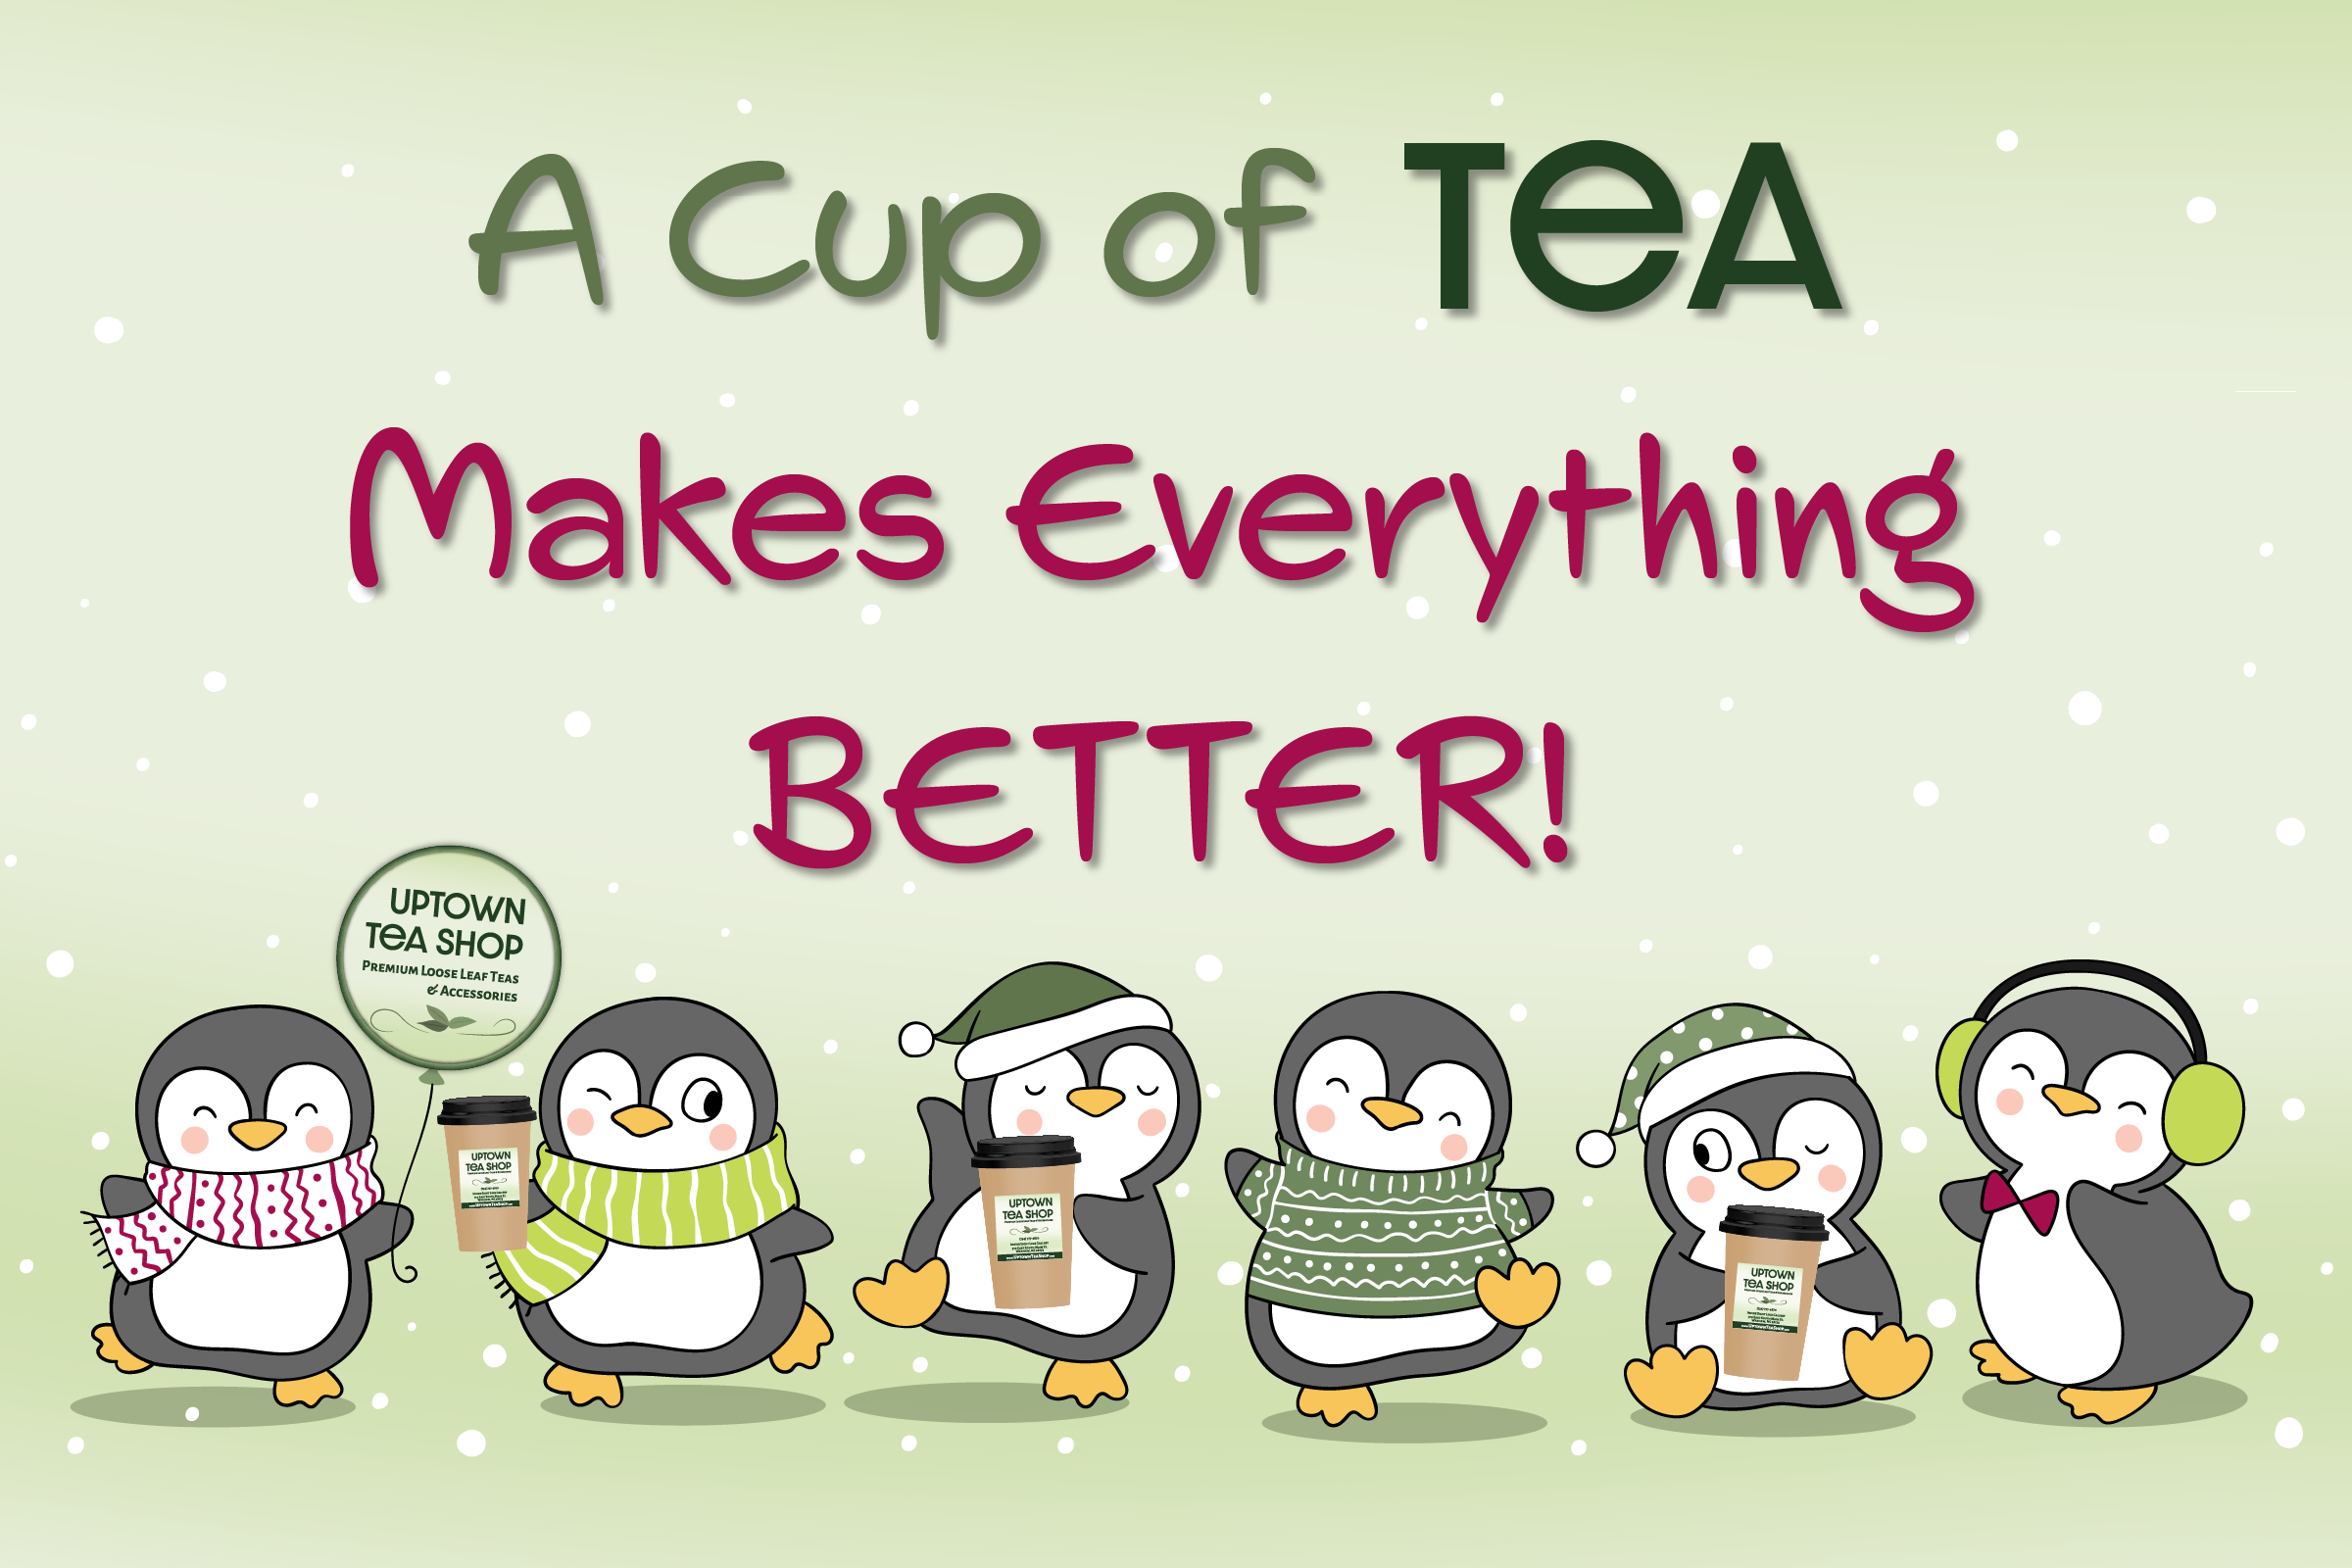 A Cup of Tea Makes Everything Better!